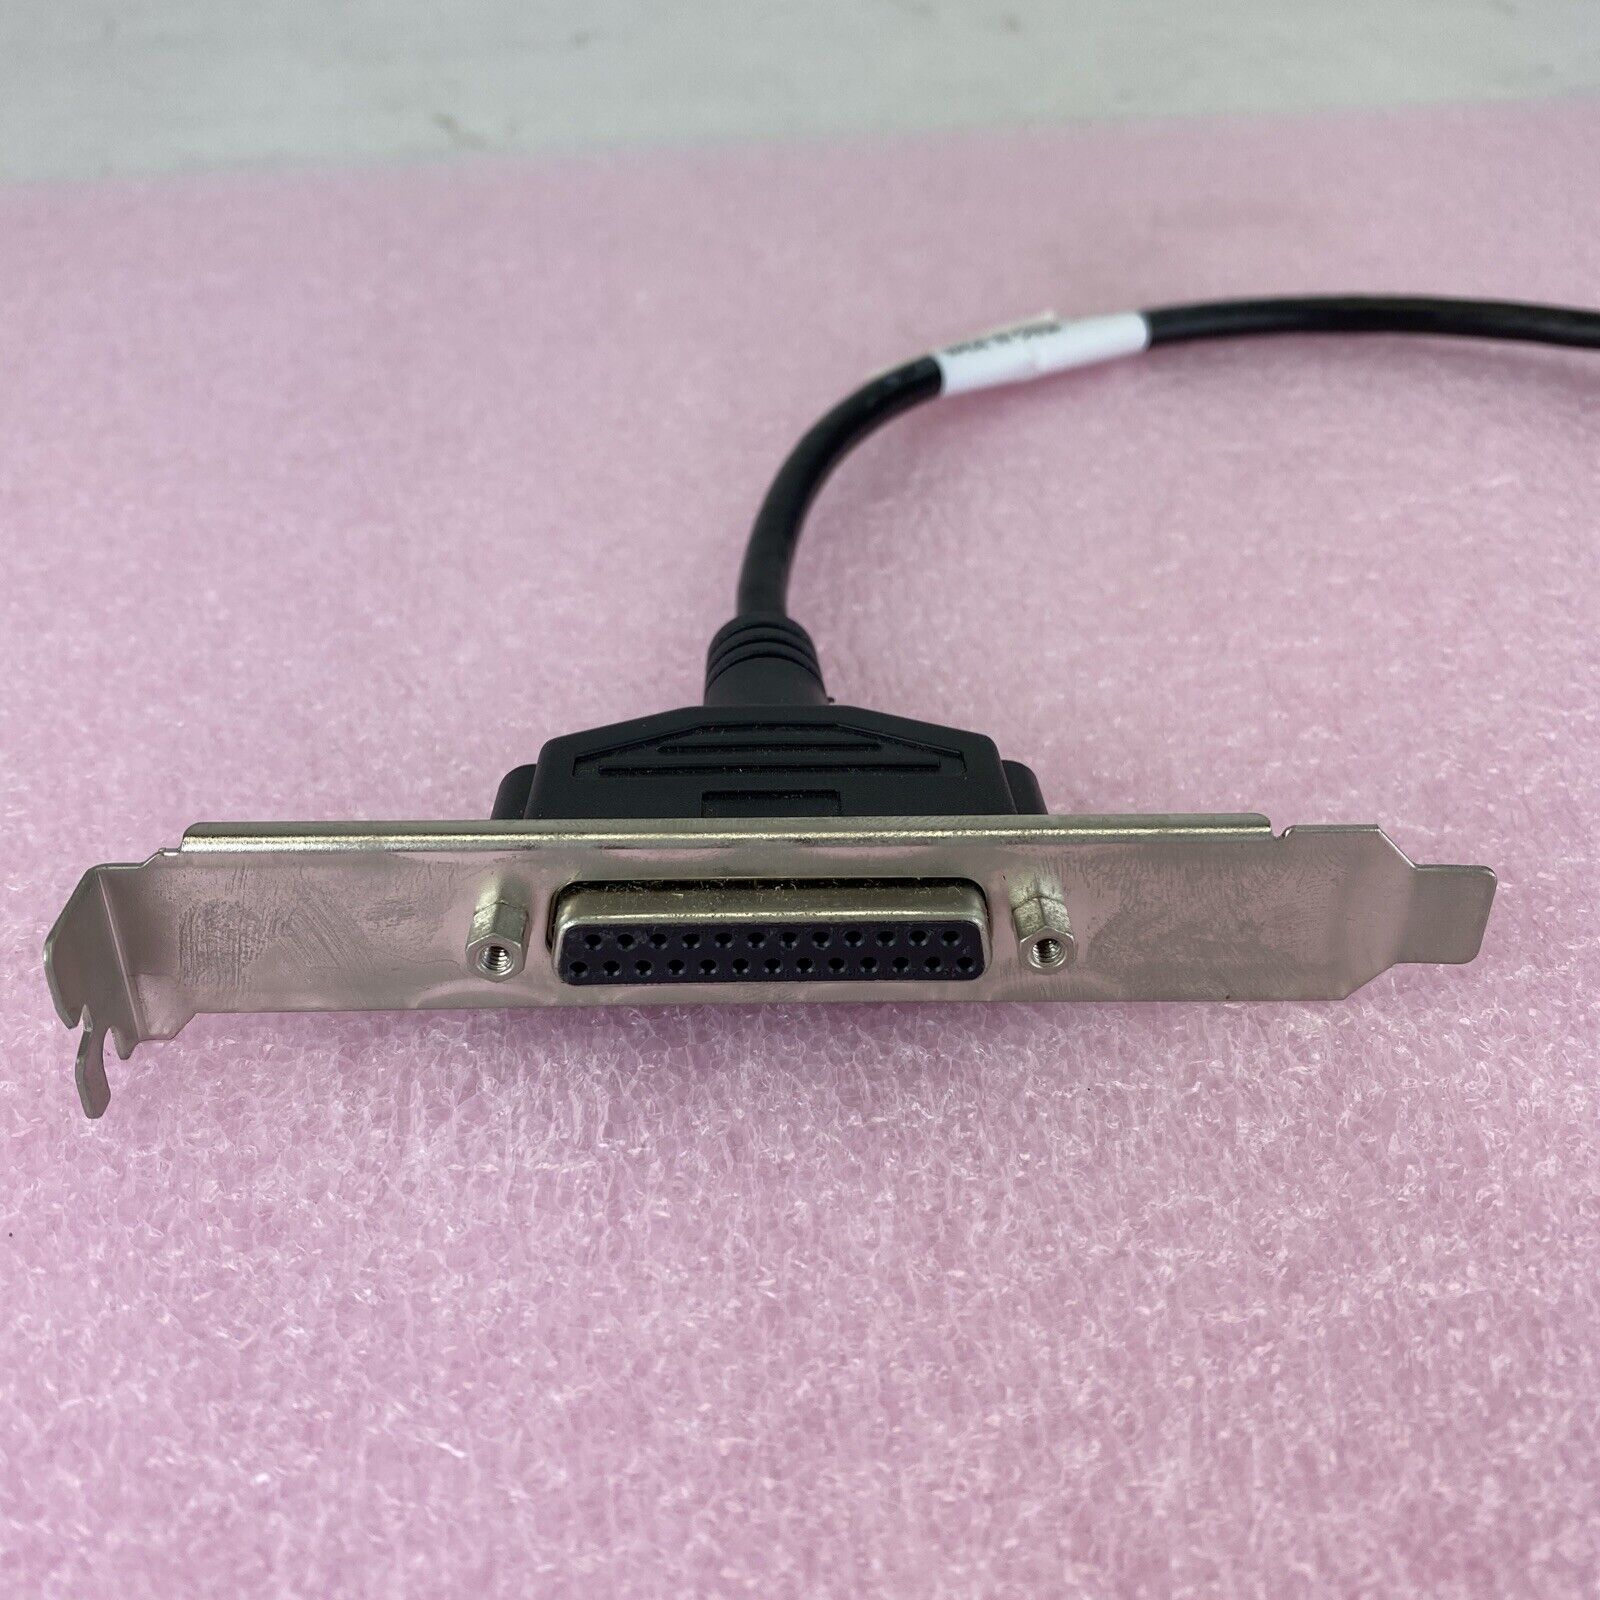 Lenovo 43N9024 ThinkCentre Full Height LPT Cable FRU 43N9022